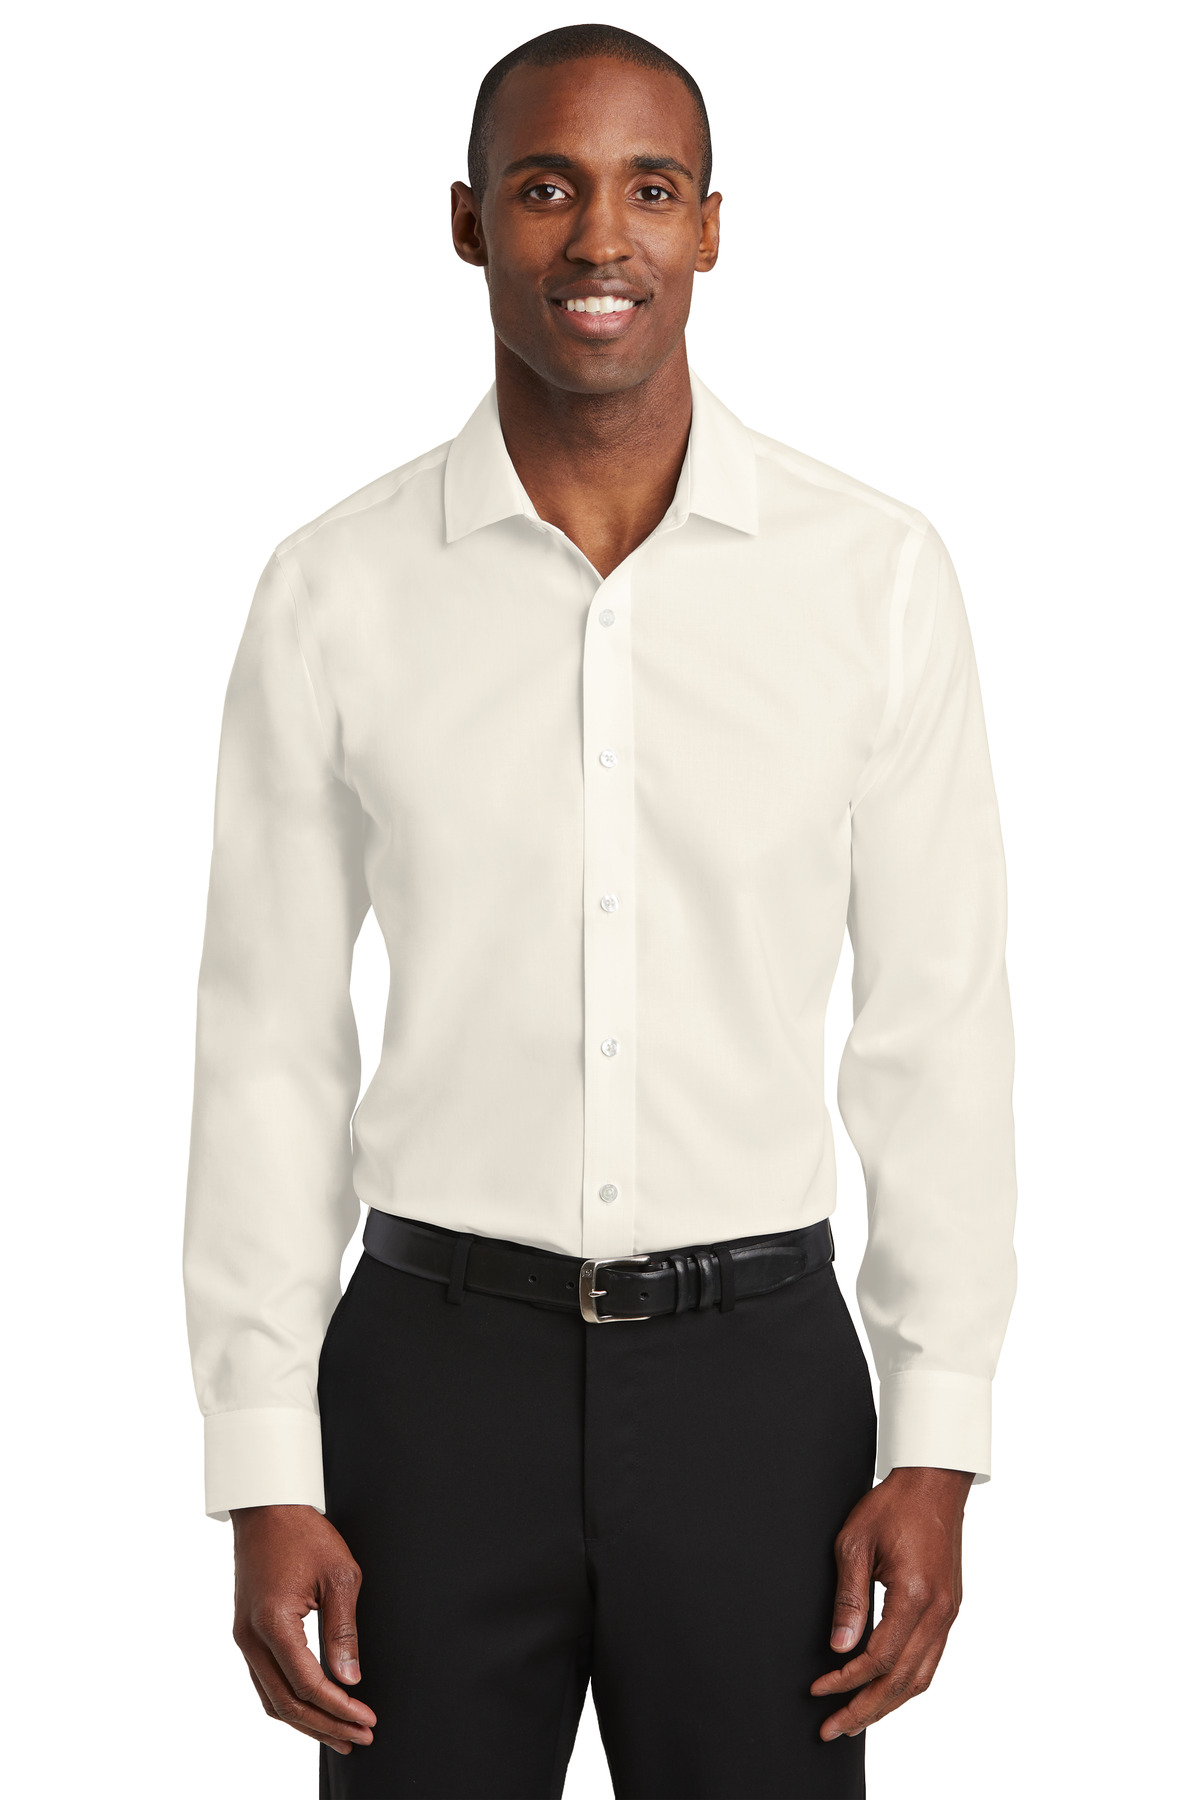 Red House  Slim Fit Pinpoint Oxford Non-Iron Shirt. RH620